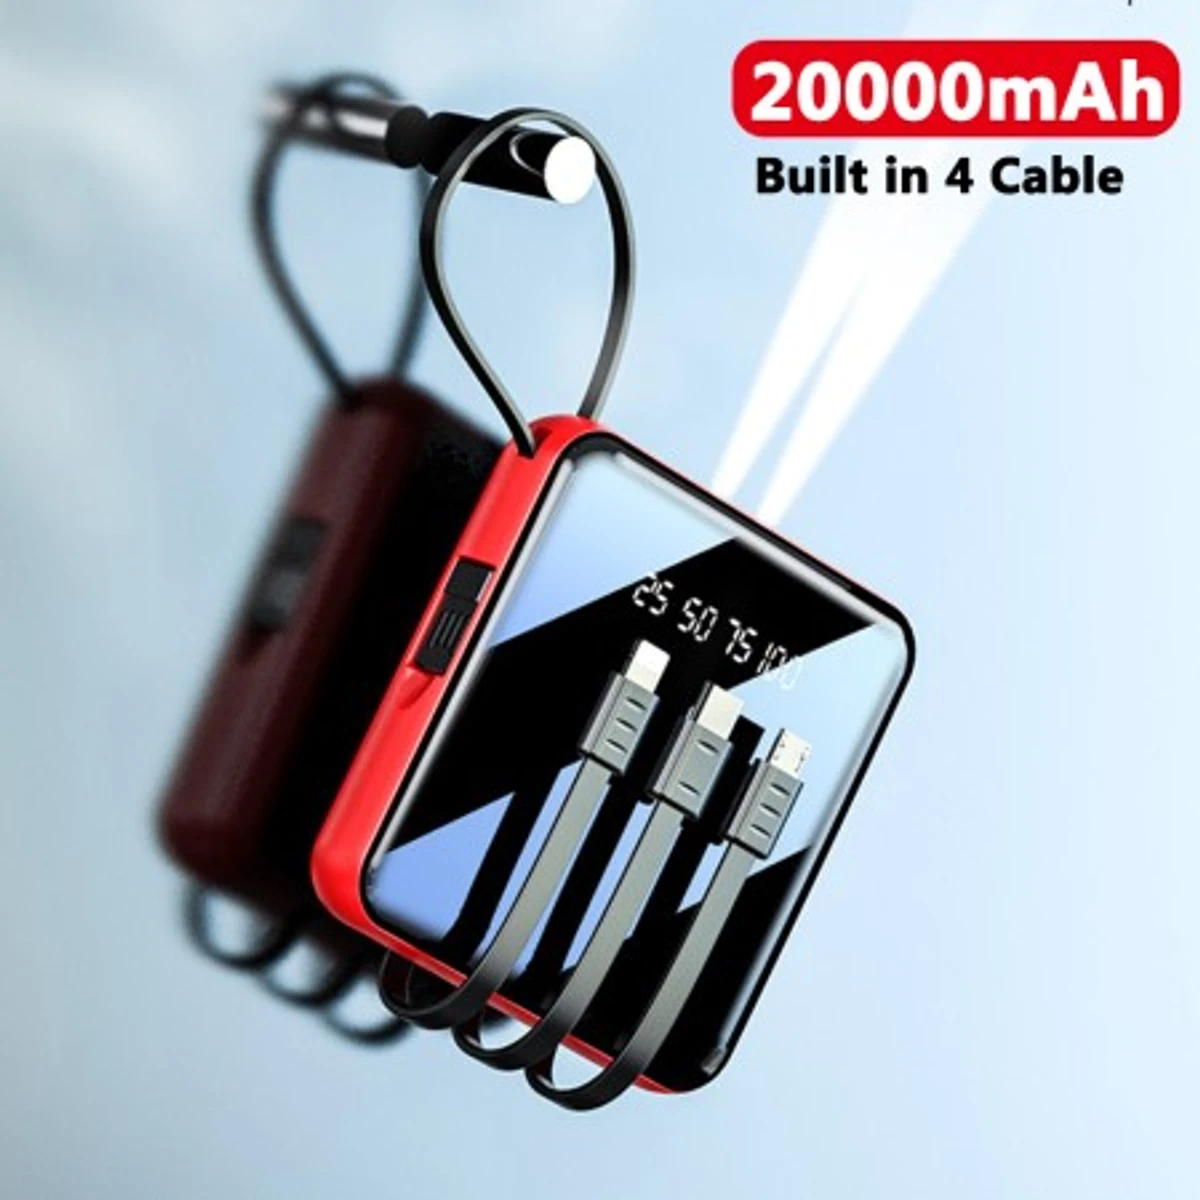 20000 MAH Powerbank with LED Display and All in One Cable set